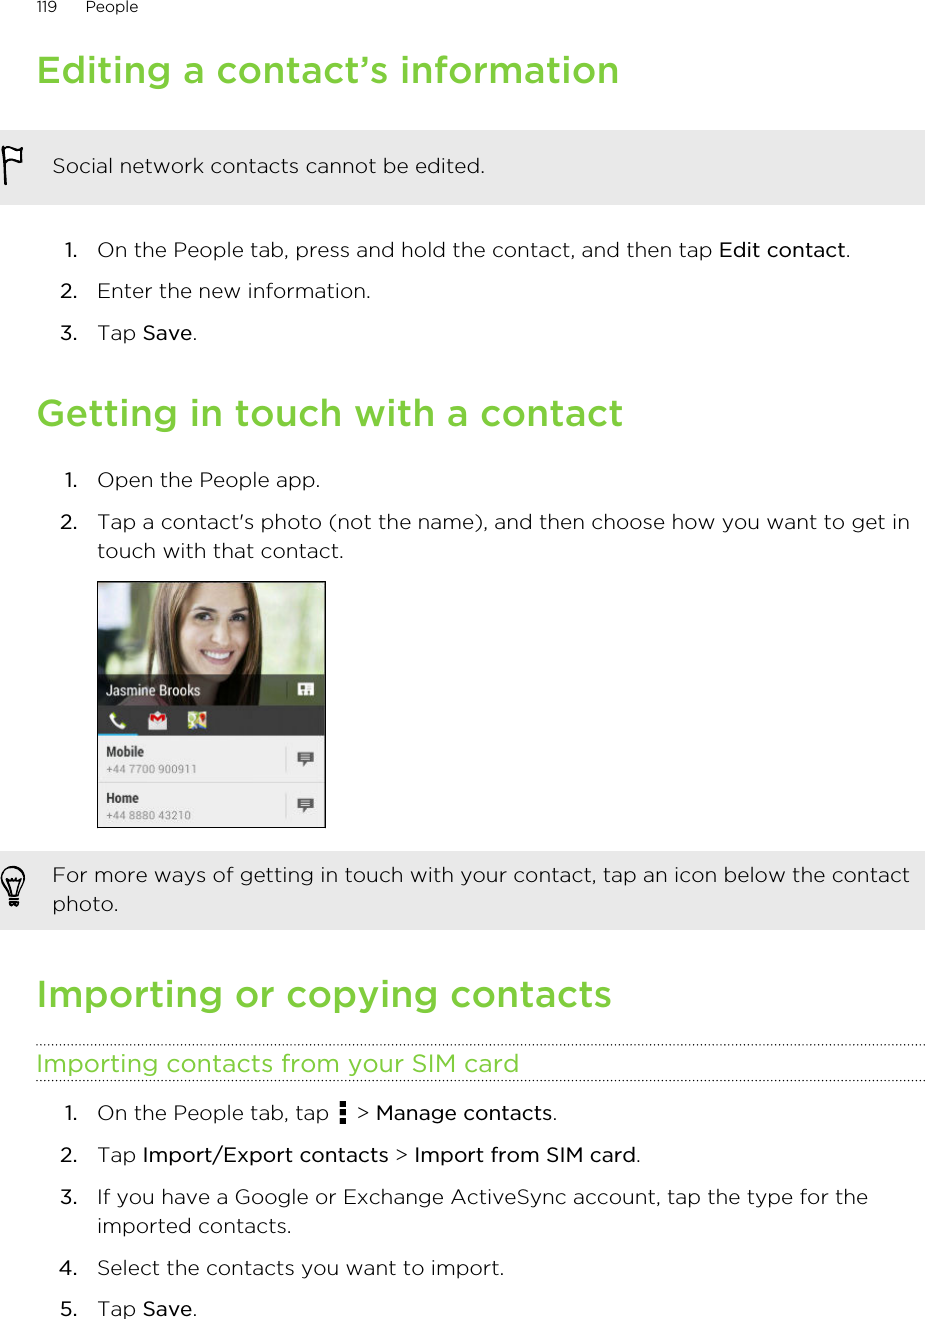 Editing a contact’s informationSocial network contacts cannot be edited.1. On the People tab, press and hold the contact, and then tap Edit contact.2. Enter the new information.3. Tap Save.Getting in touch with a contact1. Open the People app.2. Tap a contact&apos;s photo (not the name), and then choose how you want to get intouch with that contact. For more ways of getting in touch with your contact, tap an icon below the contactphoto.Importing or copying contactsImporting contacts from your SIM card1. On the People tab, tap   &gt; Manage contacts.2. Tap Import/Export contacts &gt; Import from SIM card.3. If you have a Google or Exchange ActiveSync account, tap the type for theimported contacts.4. Select the contacts you want to import.5. Tap Save.119 PeopleHTC Confidential for Certification HTC Confidential for Certification